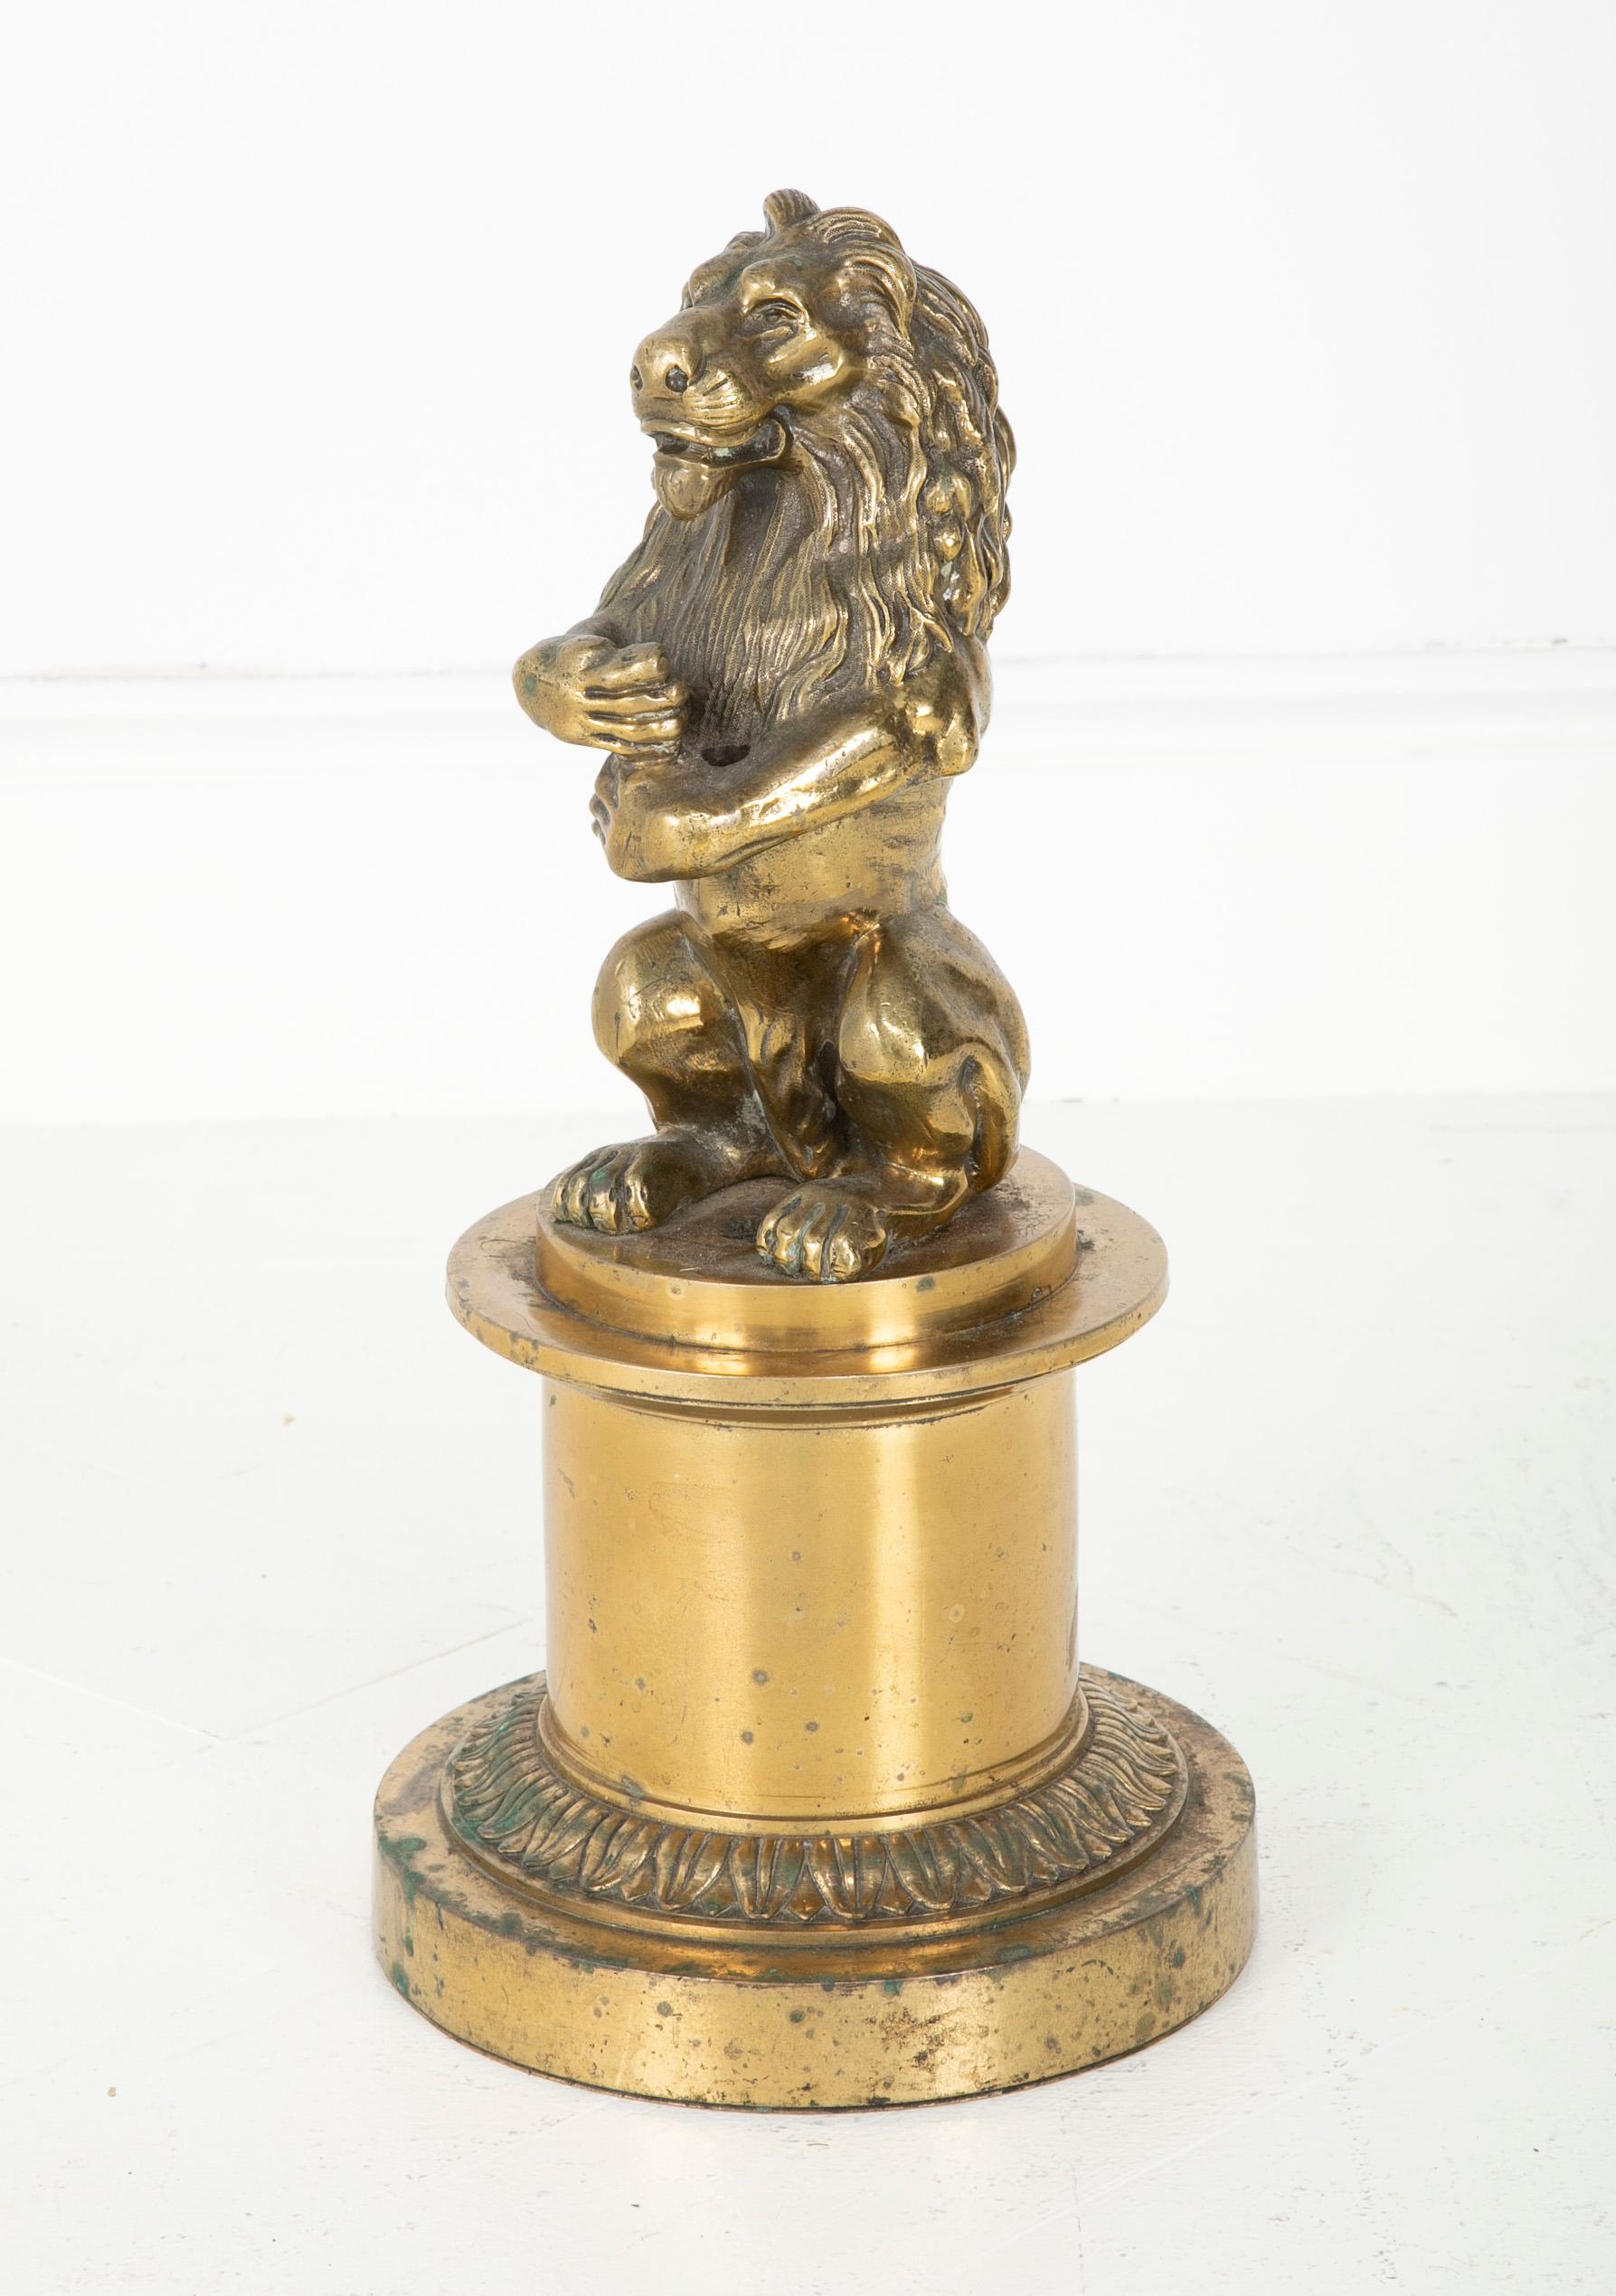 The lion is seated on his haunches sitting on a raised circular plinth. He can hold a small flag or banner of your choice in his front paws. A very good bronze cast with a nice gilded surface. French, 19th century.
Measures: 15 inches high, 8.75